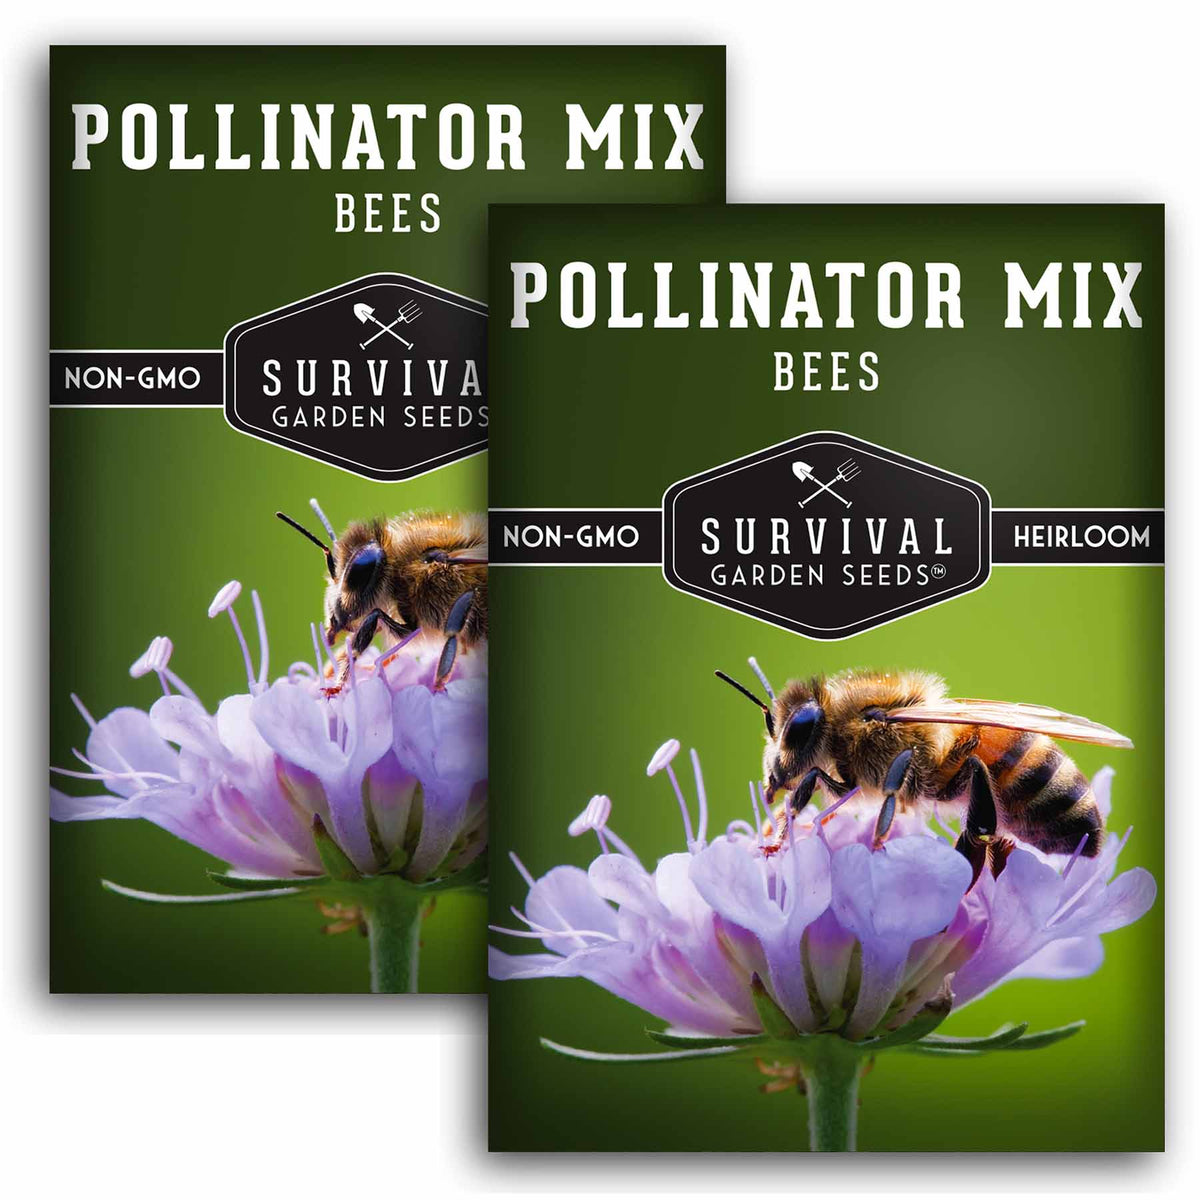 2 packets of Pollinator Mix Bees seeds